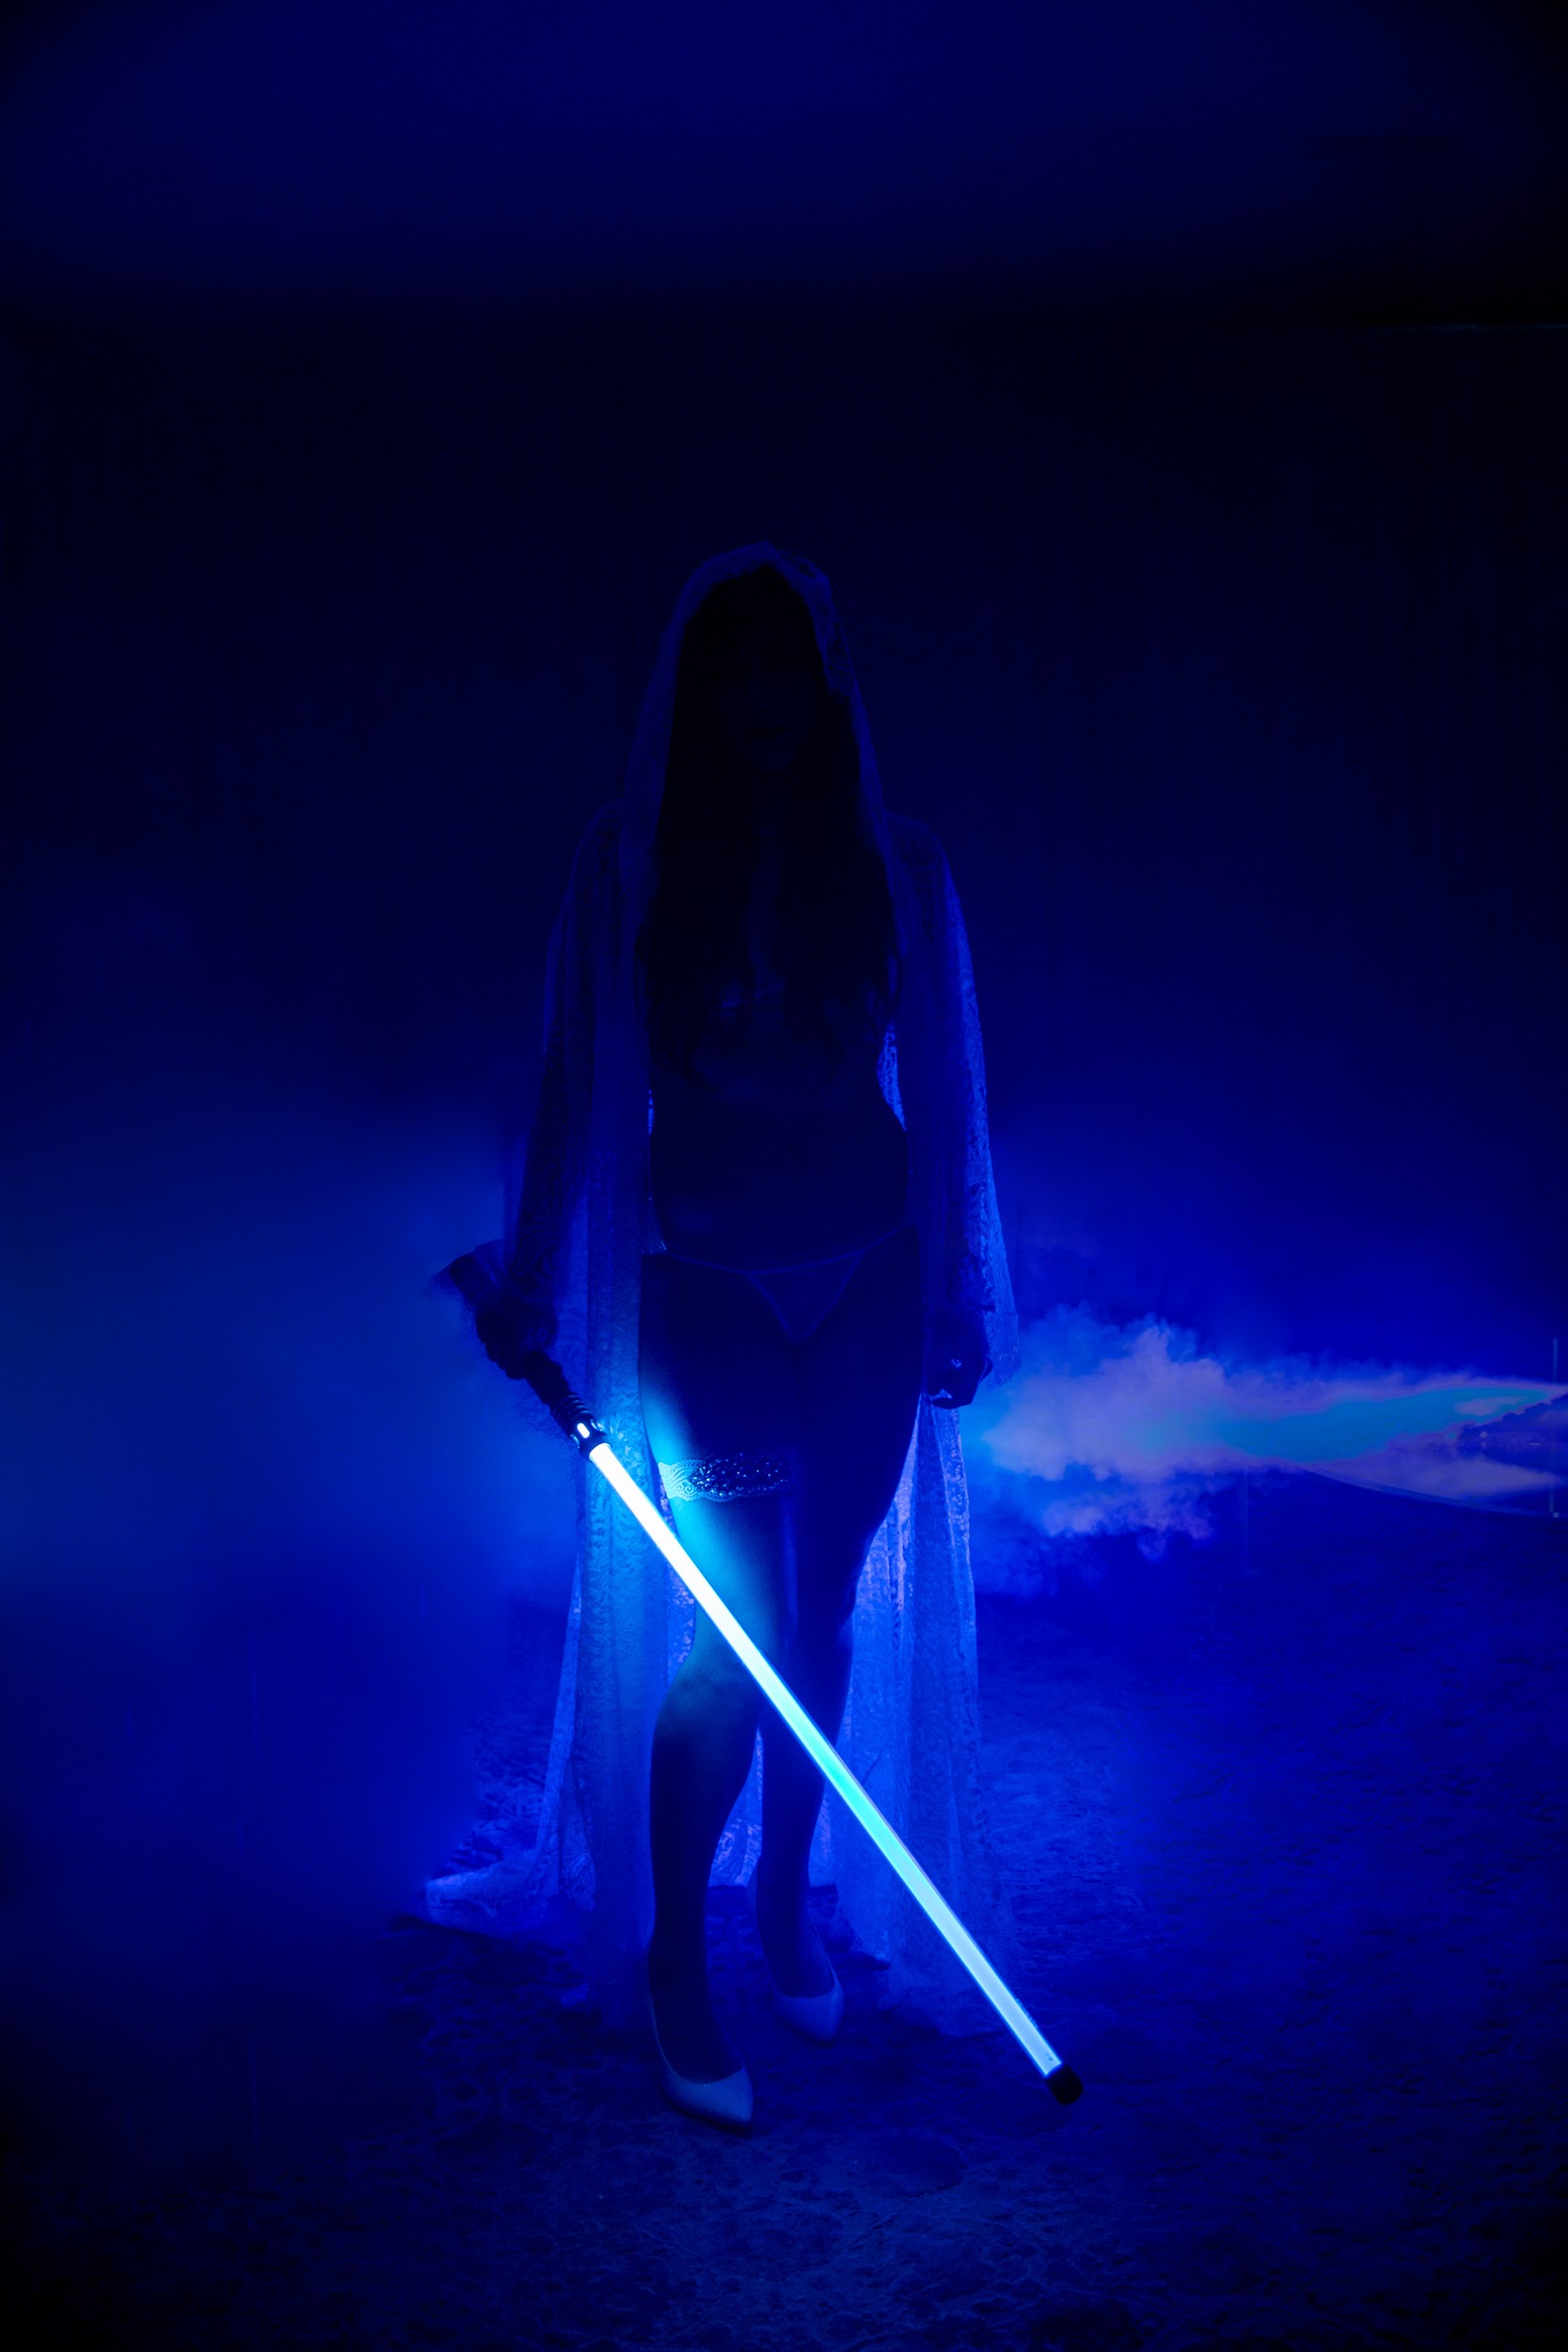 woman's silhouette illuminated by light saber